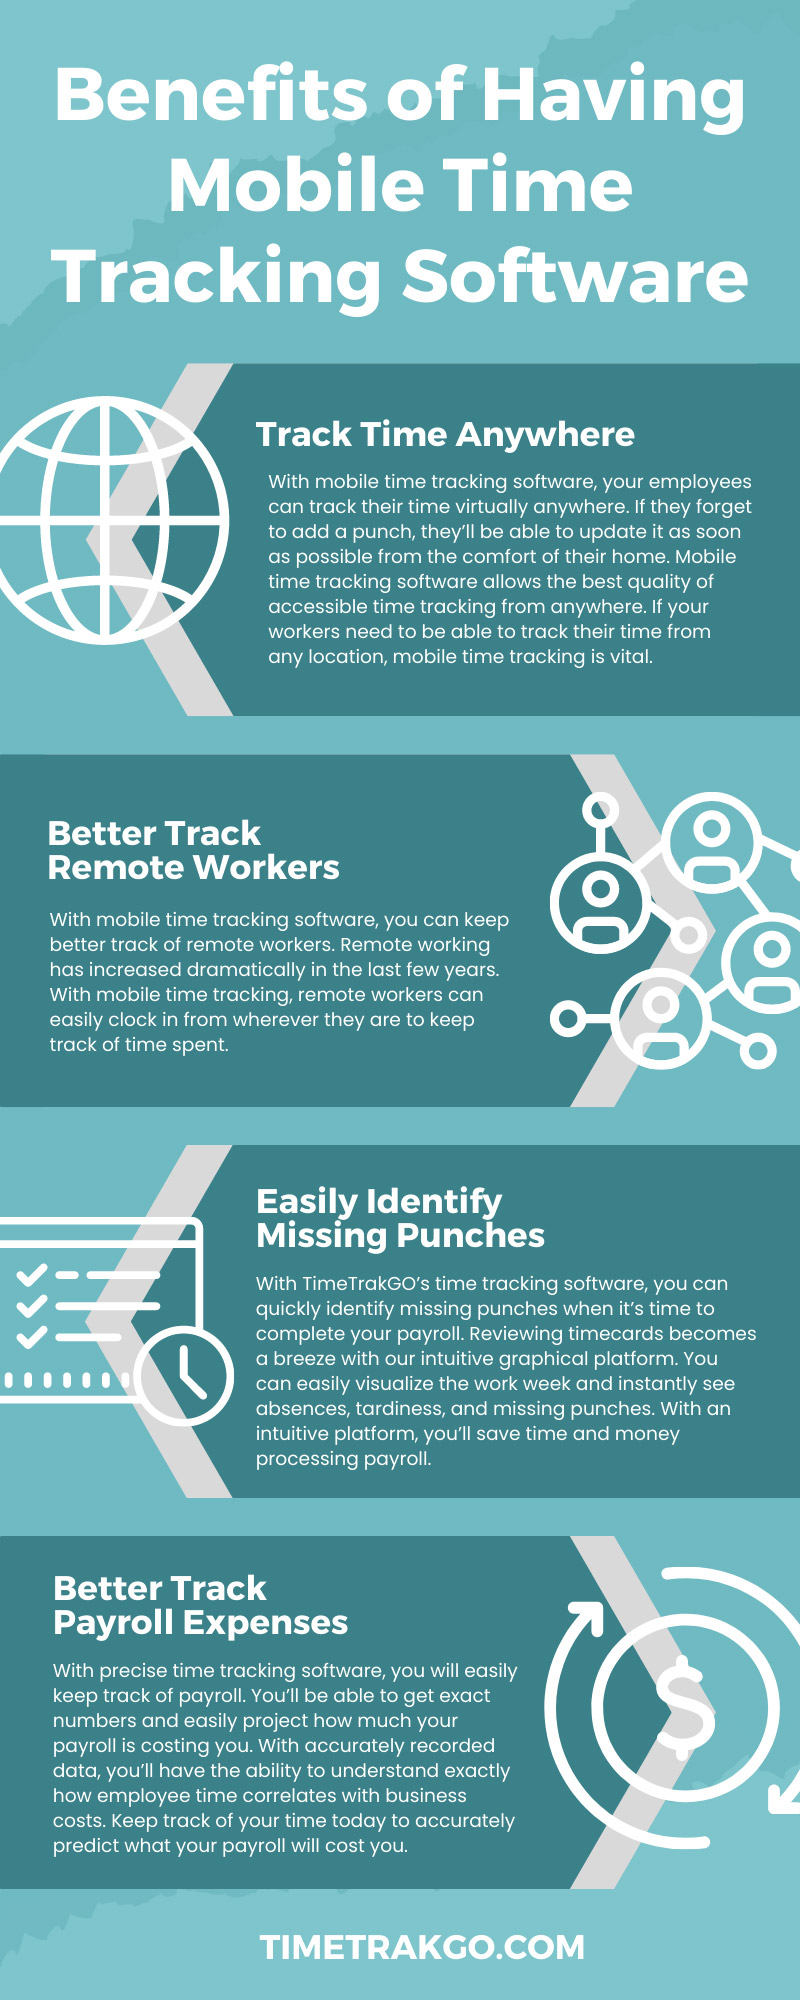 14 Benefits of Having Mobile Time Tracking Software